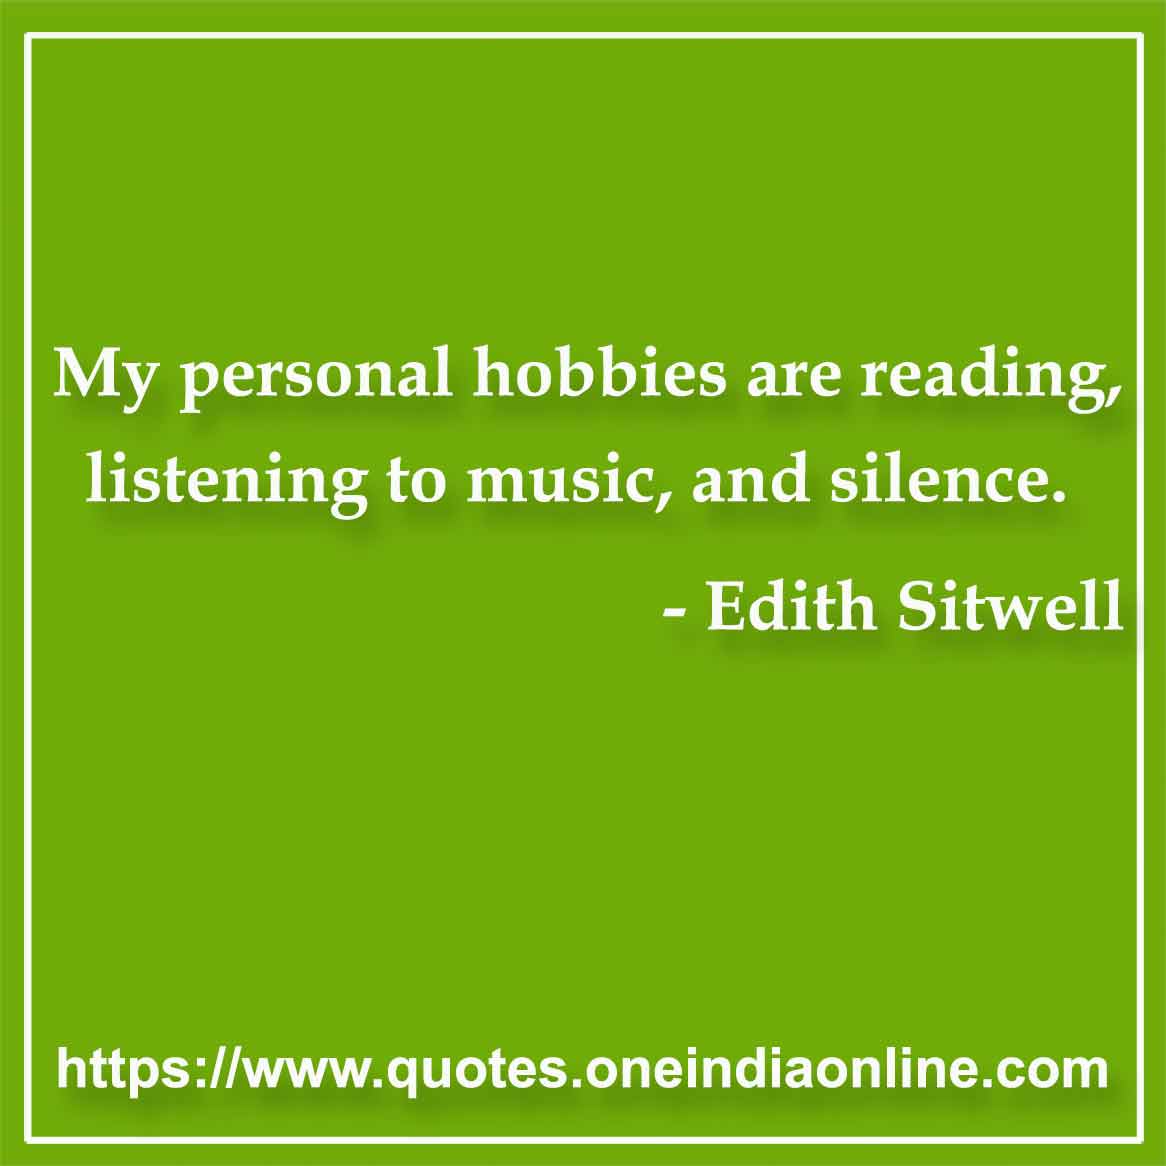 My personal hobbies are reading, listening to music, and silence.

- Silence Quotes by Edith Sitwell